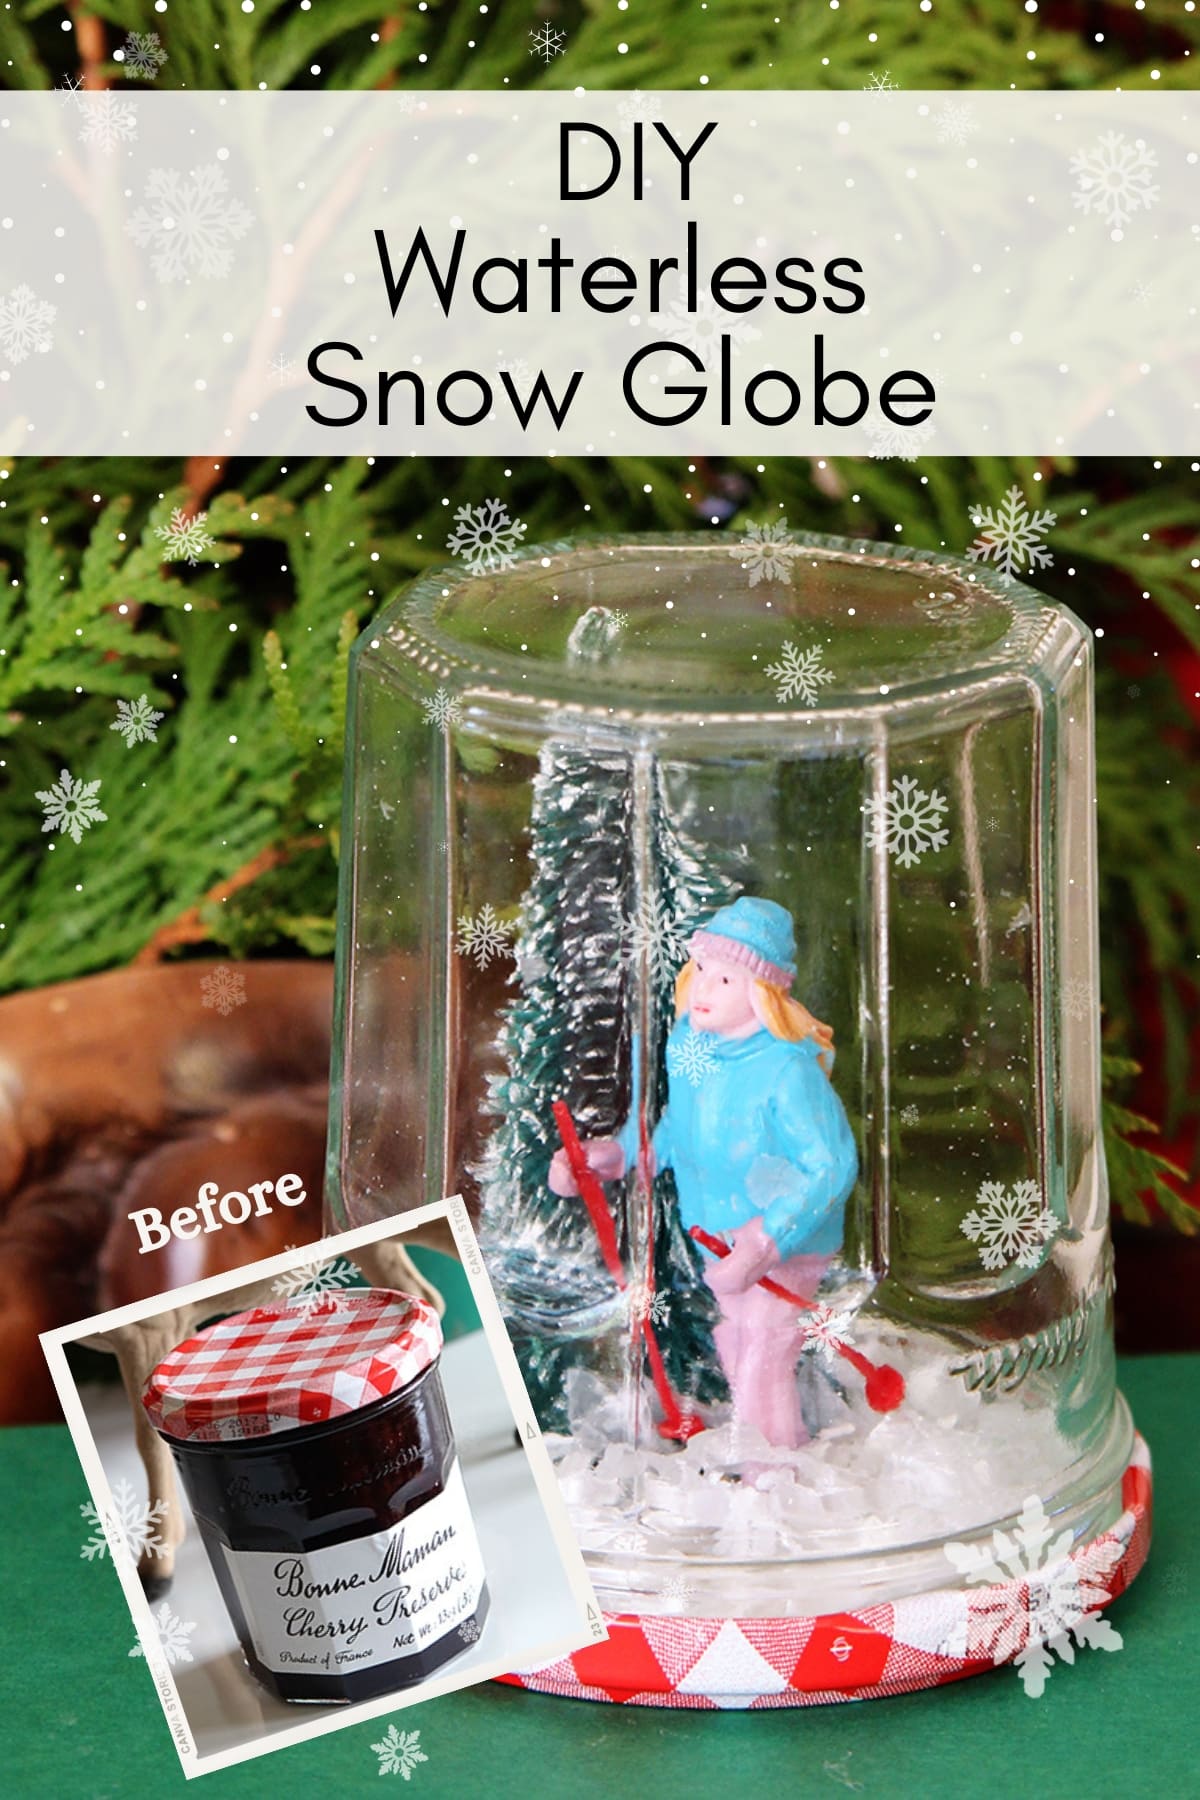 Looking to shake up your holiday decor? Learn how to make these enchanting DIY Waterless Snow Globes using repurposed jars! A quick, easy and inexpensive holiday craft project the kids can help with.